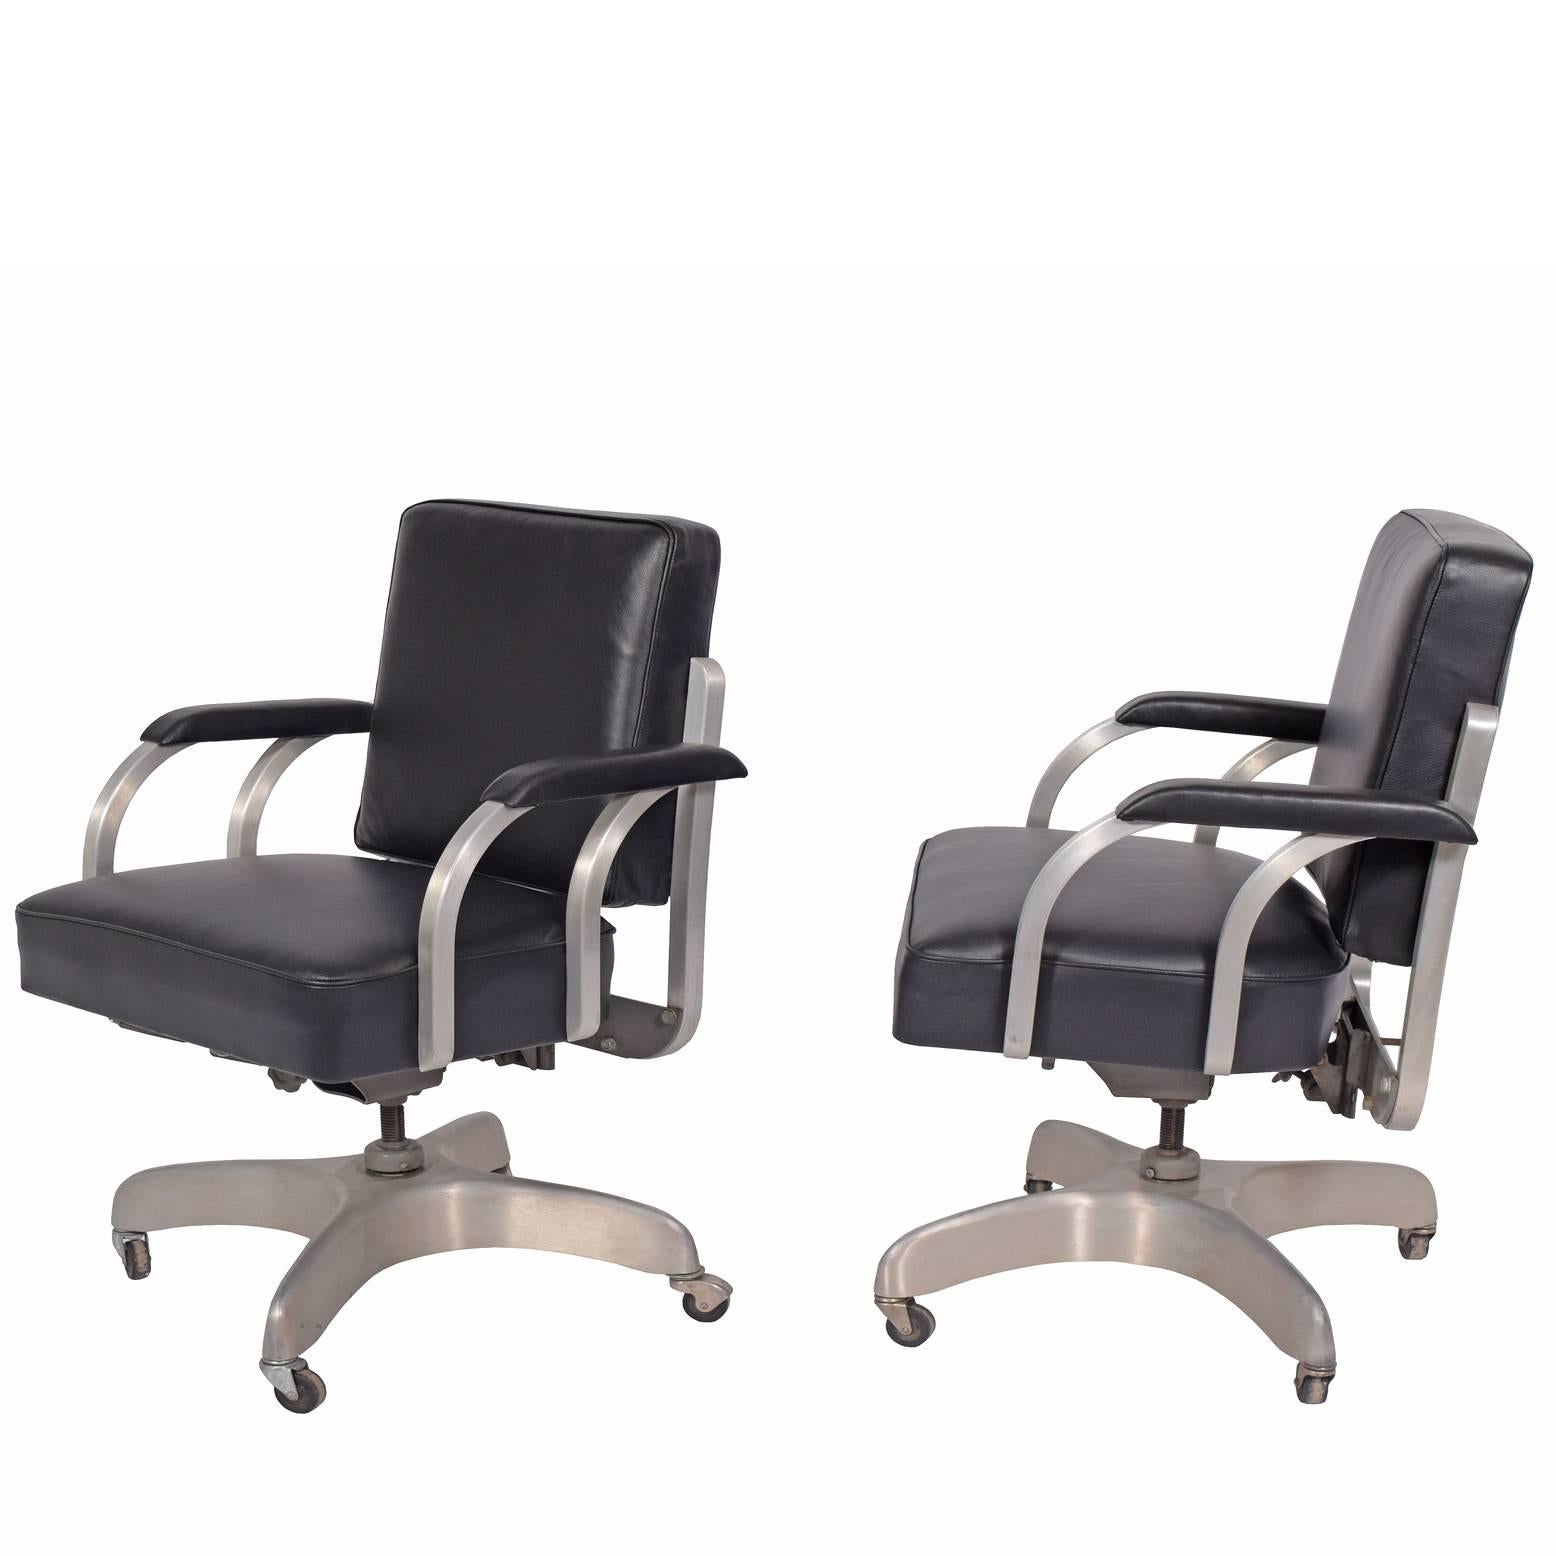 Great American classic office chairs featuring square tube solid aluminium frame and cast aluminium. Base is adjustable in height and has tilt and swivel functionality. New black leather upholstery made by Emaco.